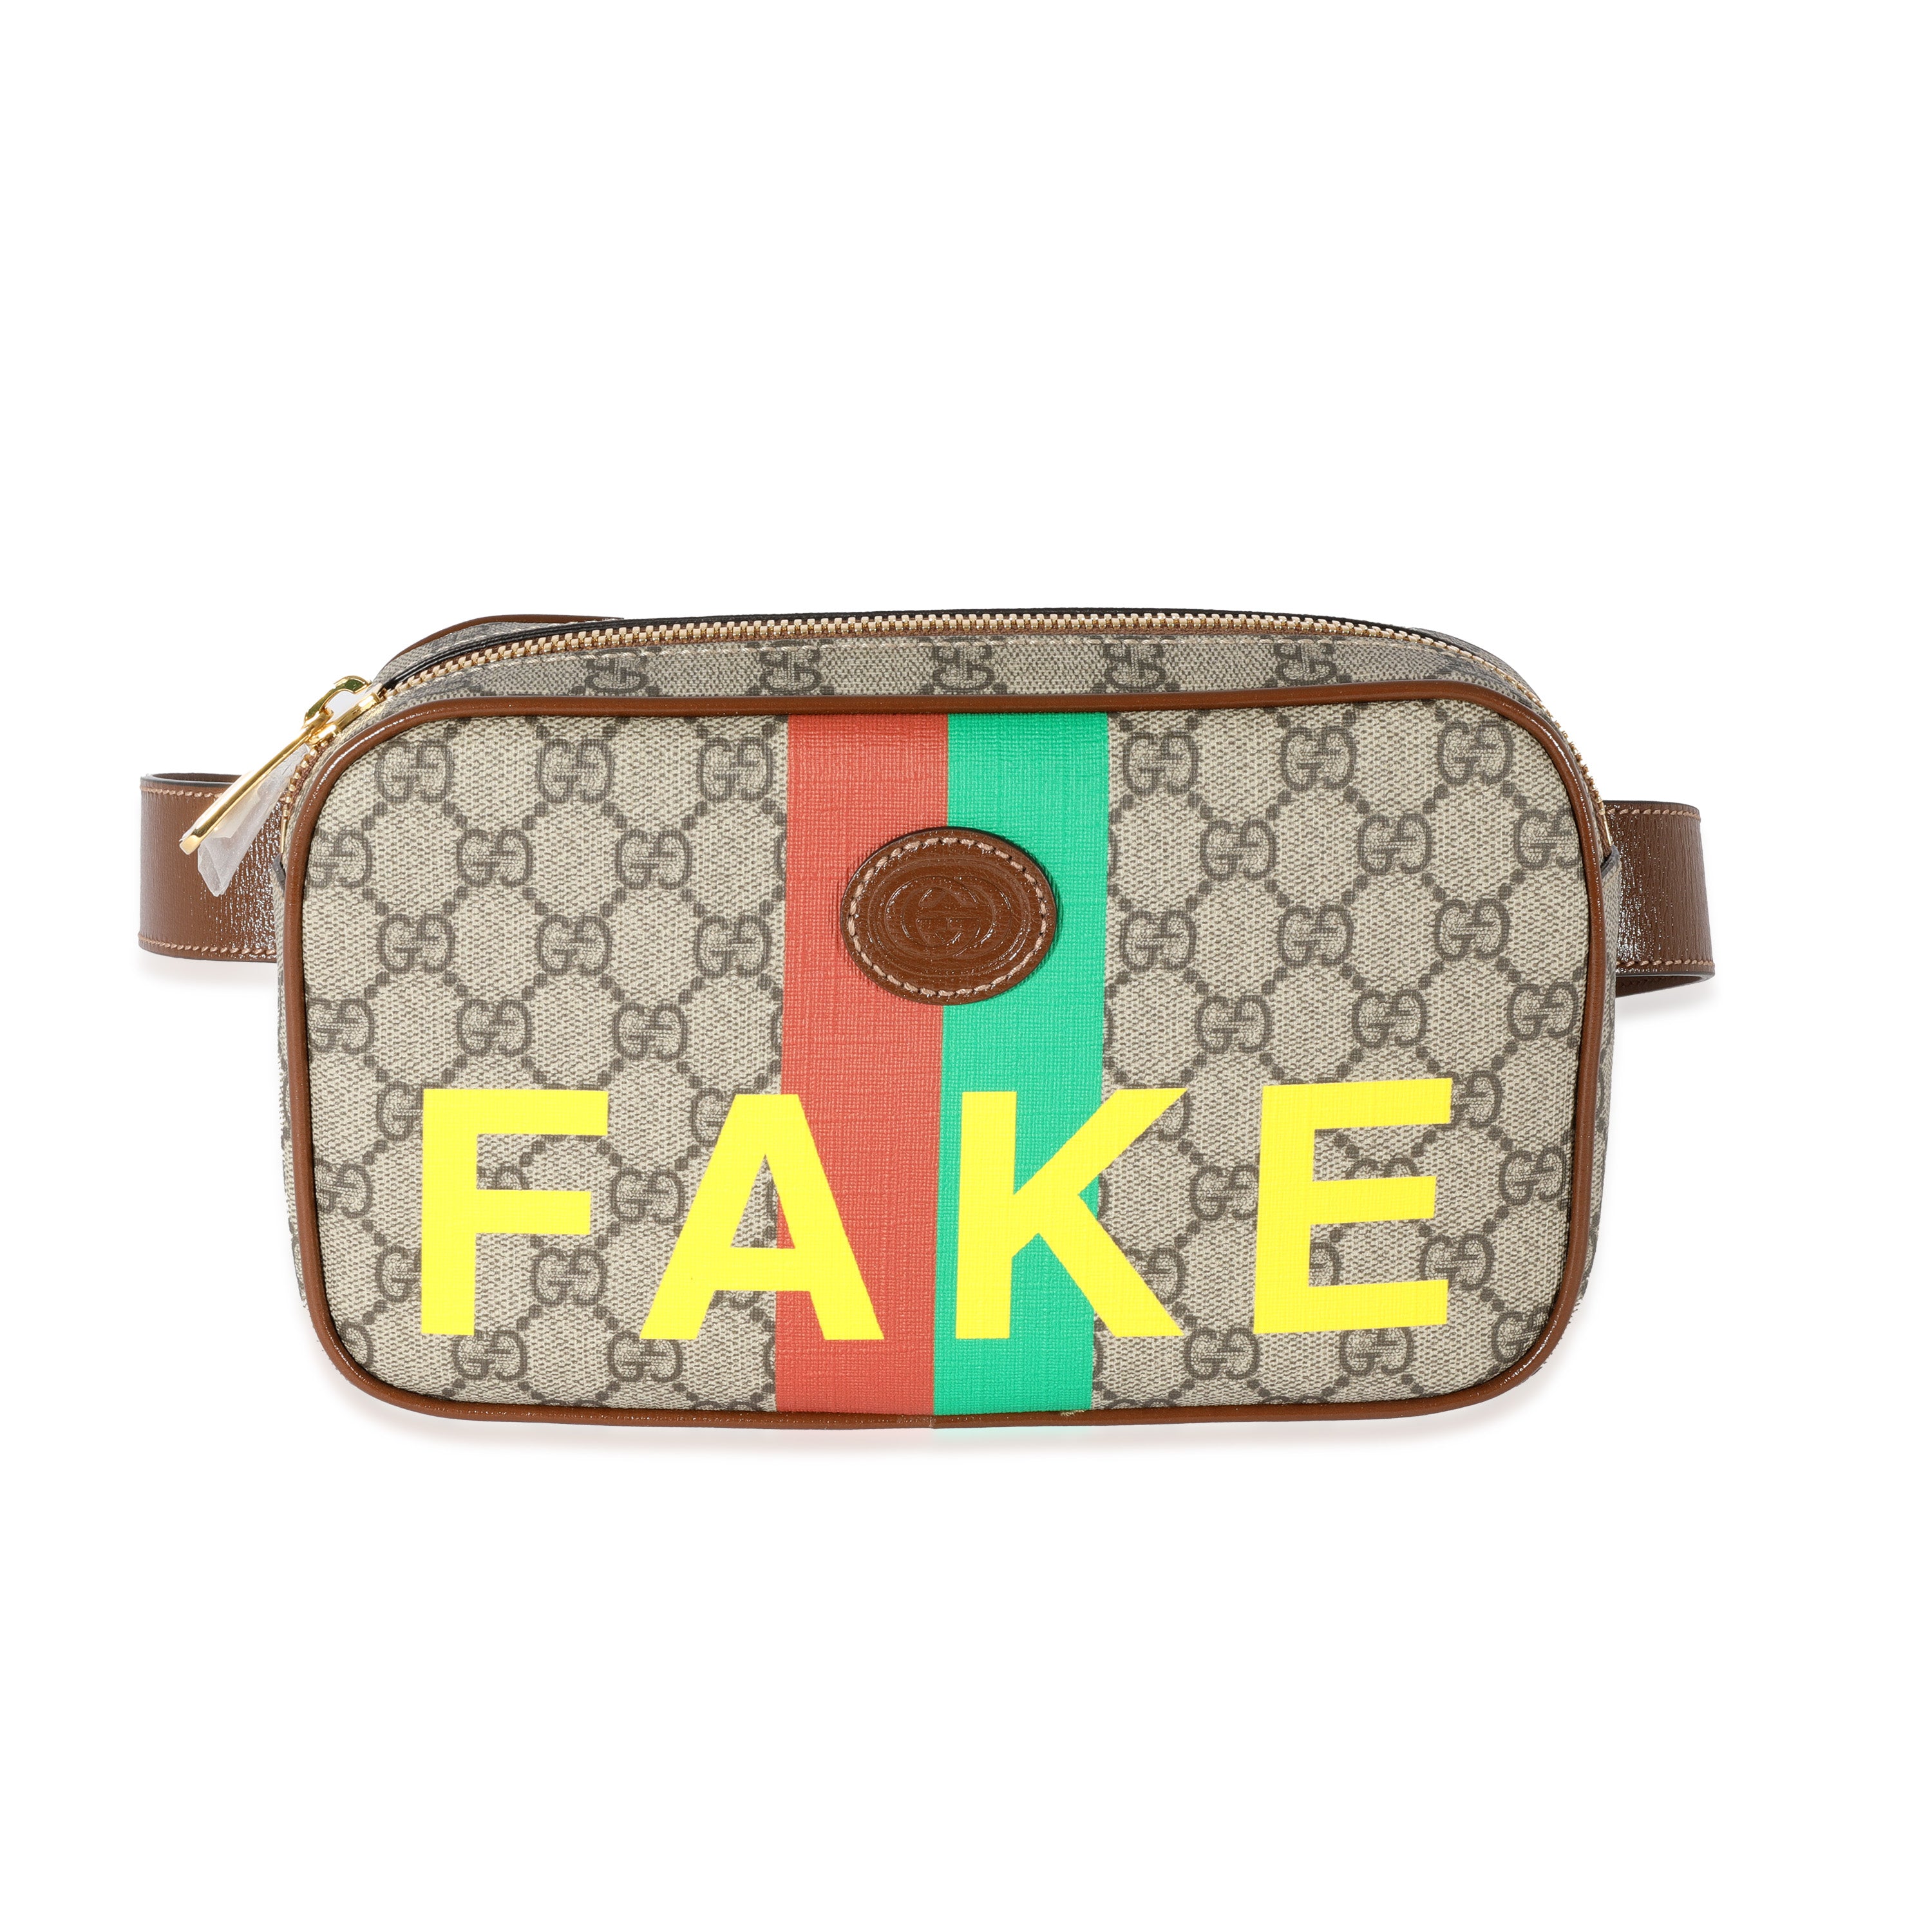 How to Spot a Fake Gucci Bag: Part 3 